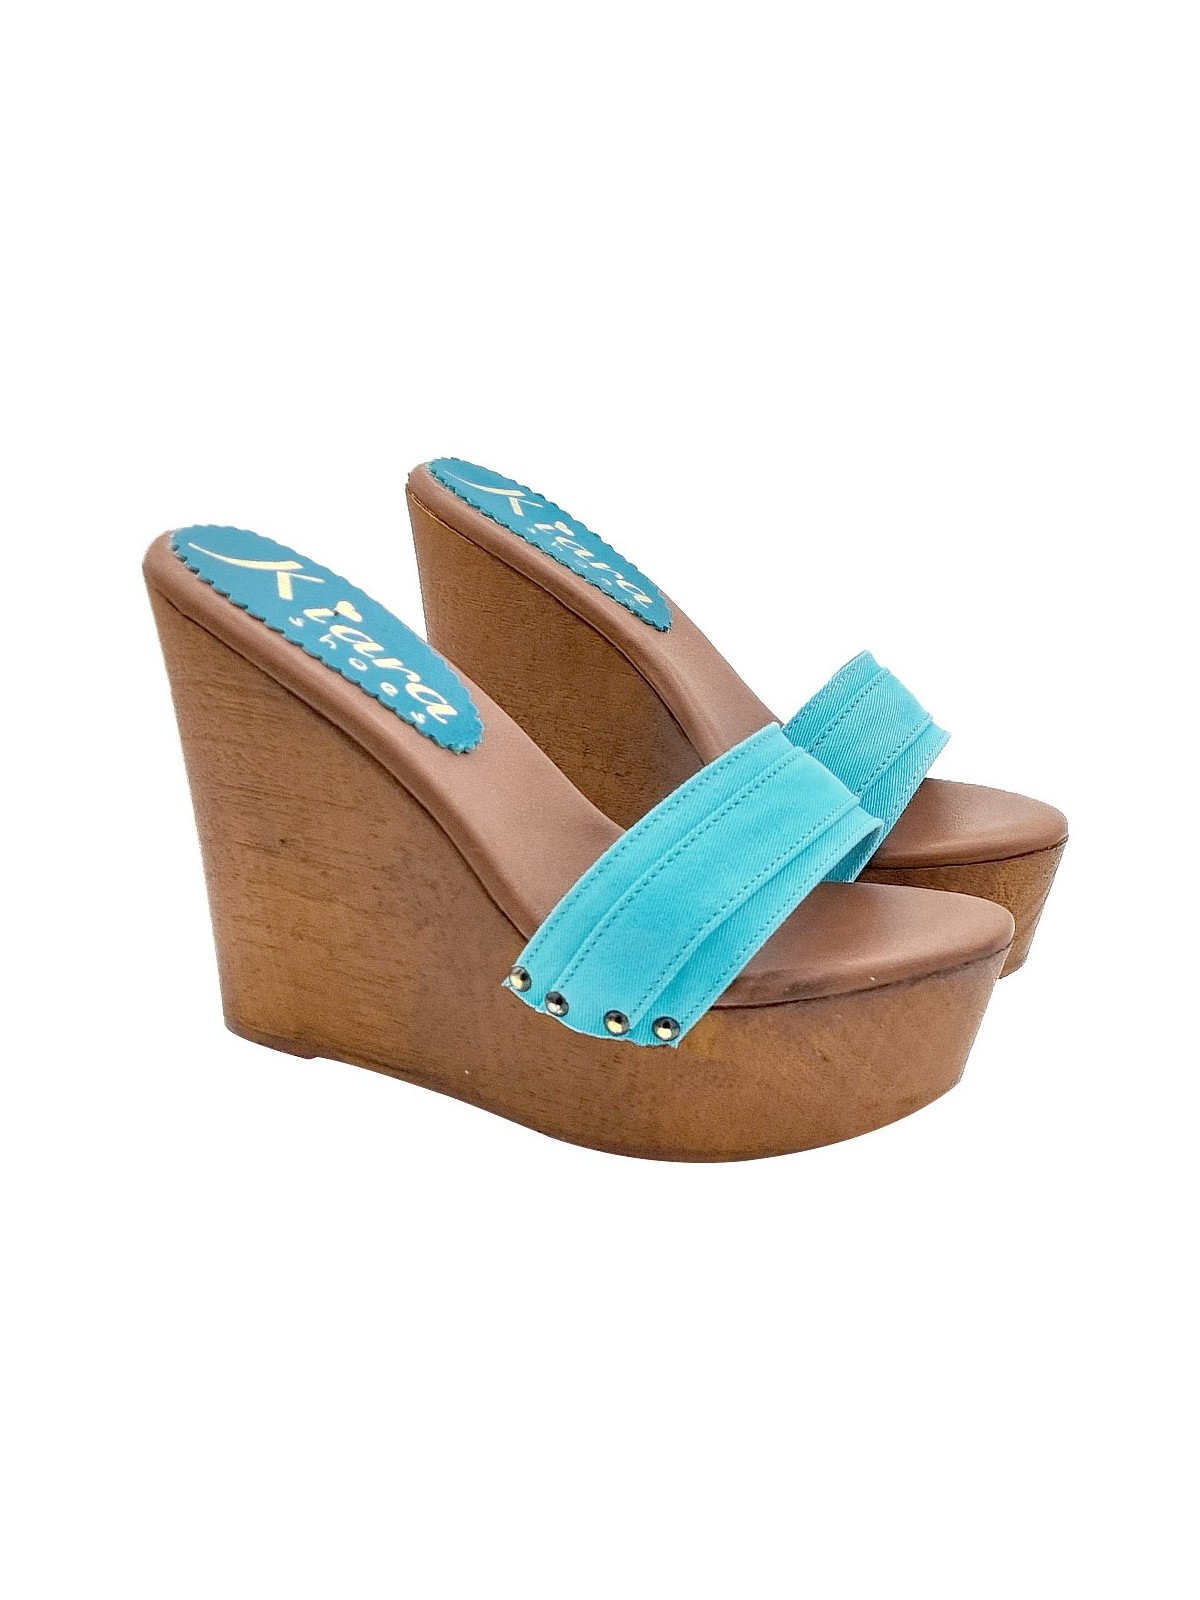 TURQUOISE WEDGE SANDALS